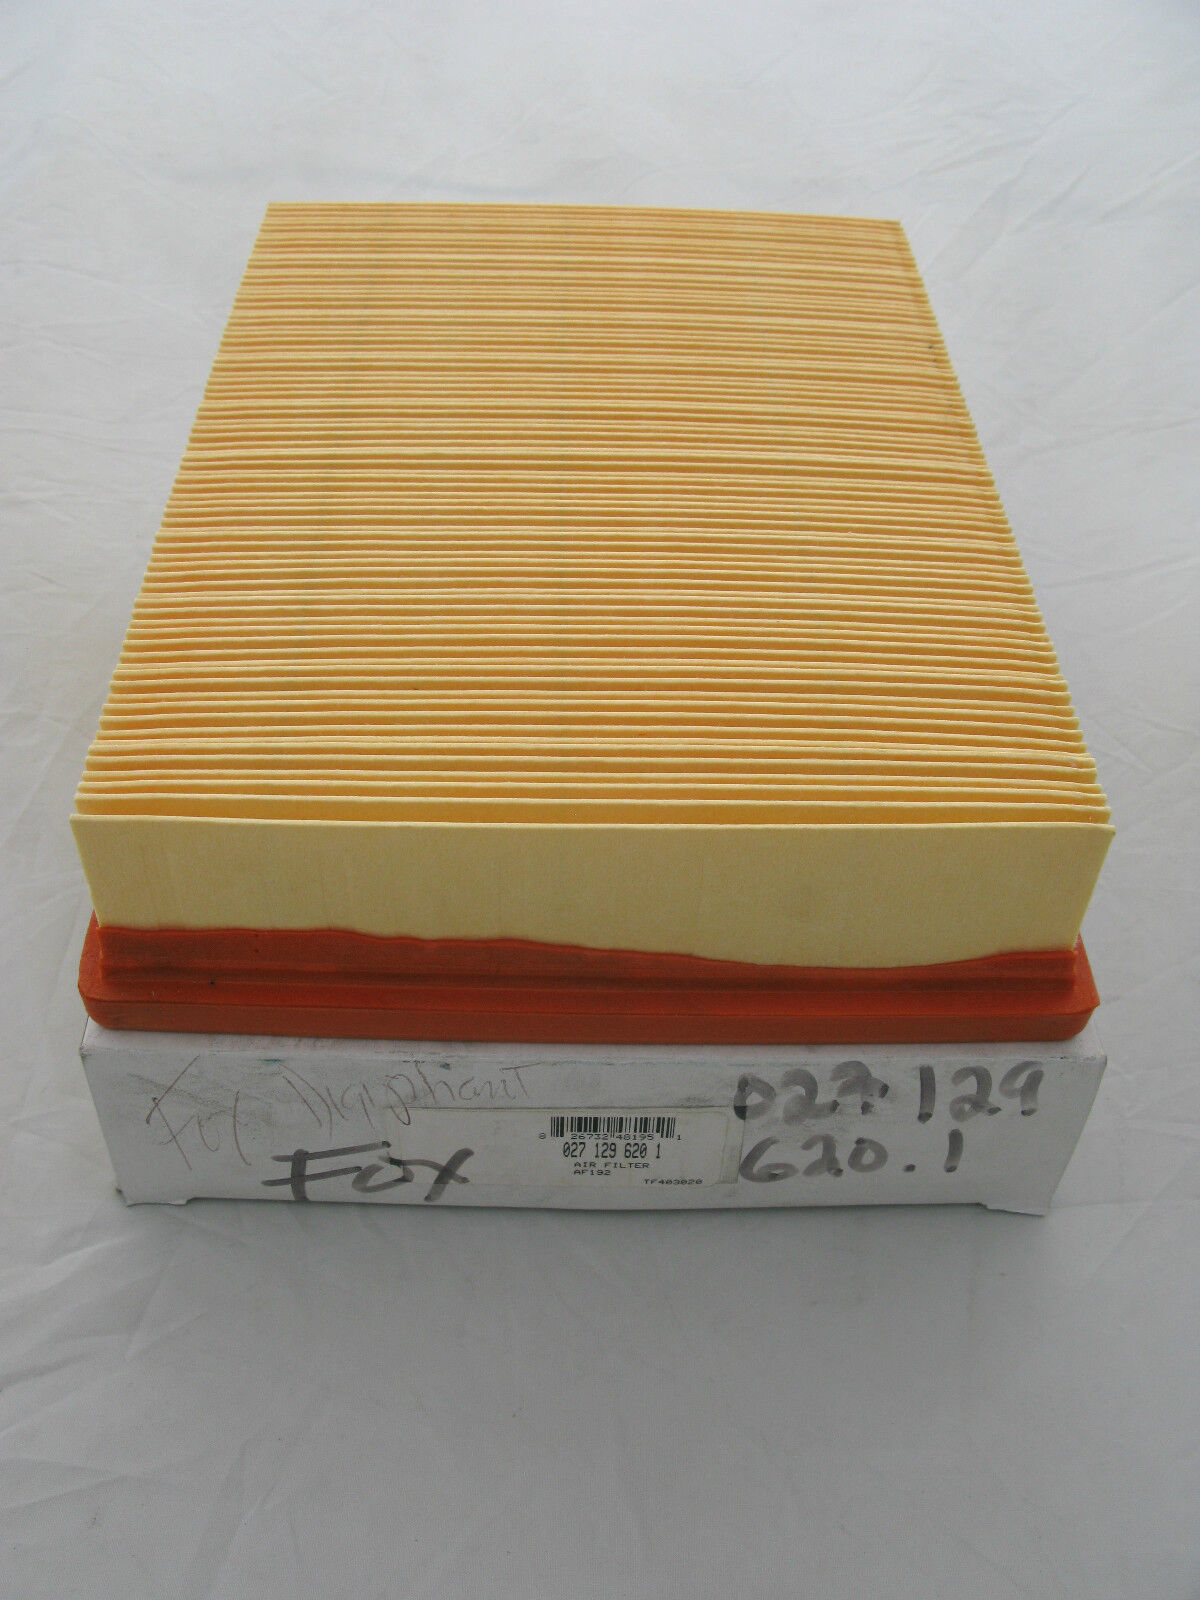 New old stock Engine Air Filter fit VW FOX 87-93 (027 129 620 1)